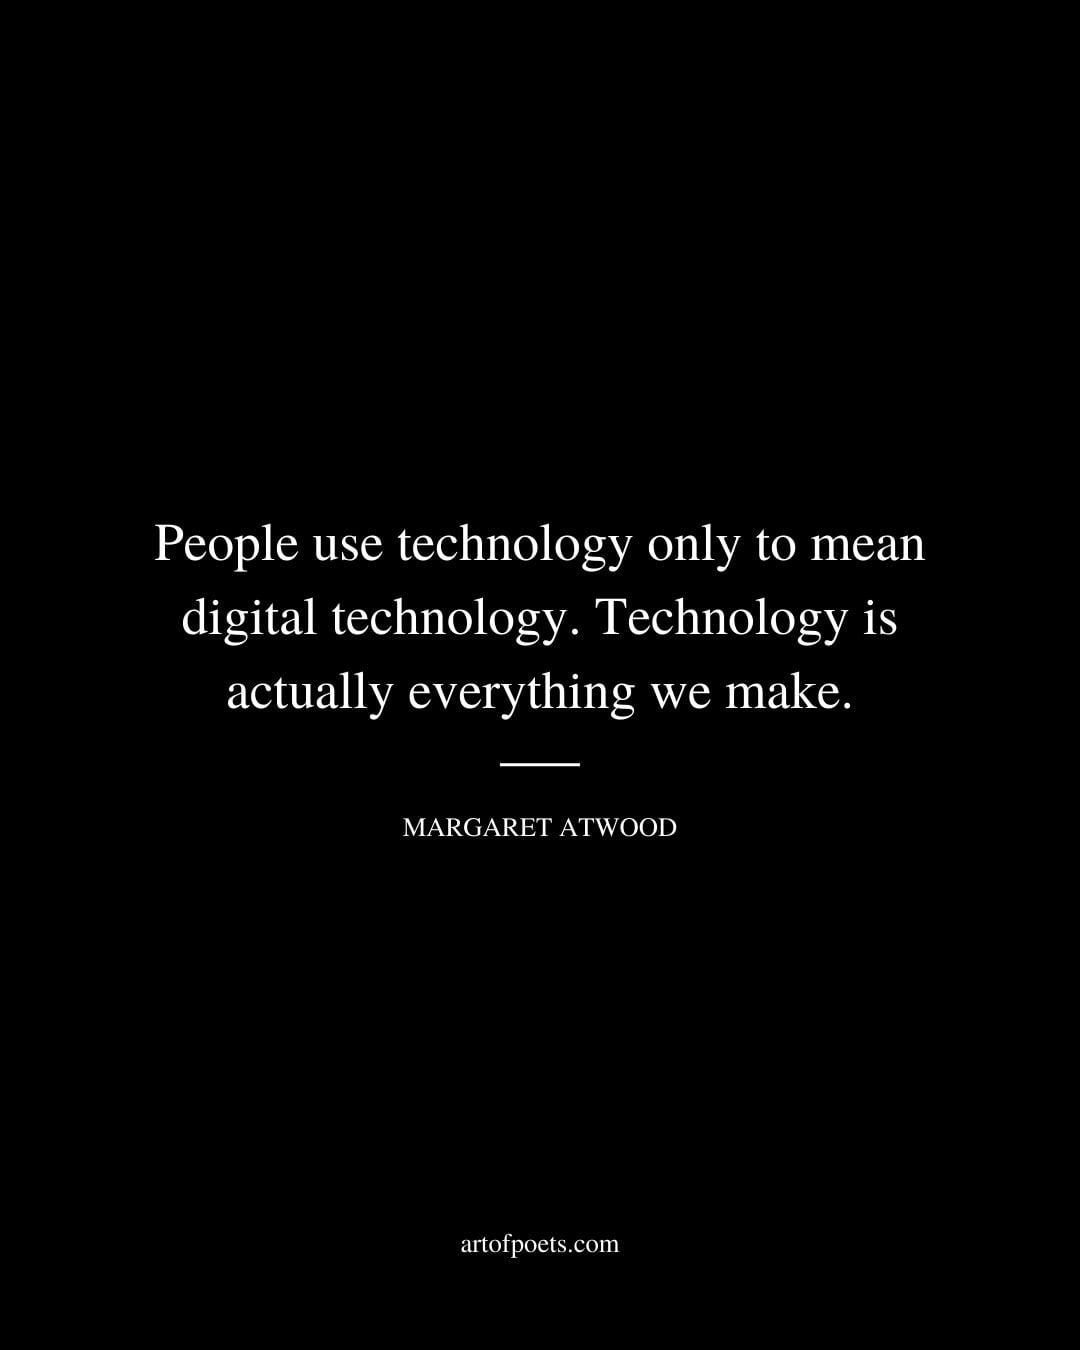 People use technology only to mean digital technology. Technology is actually everything we make. Margaret Atwood